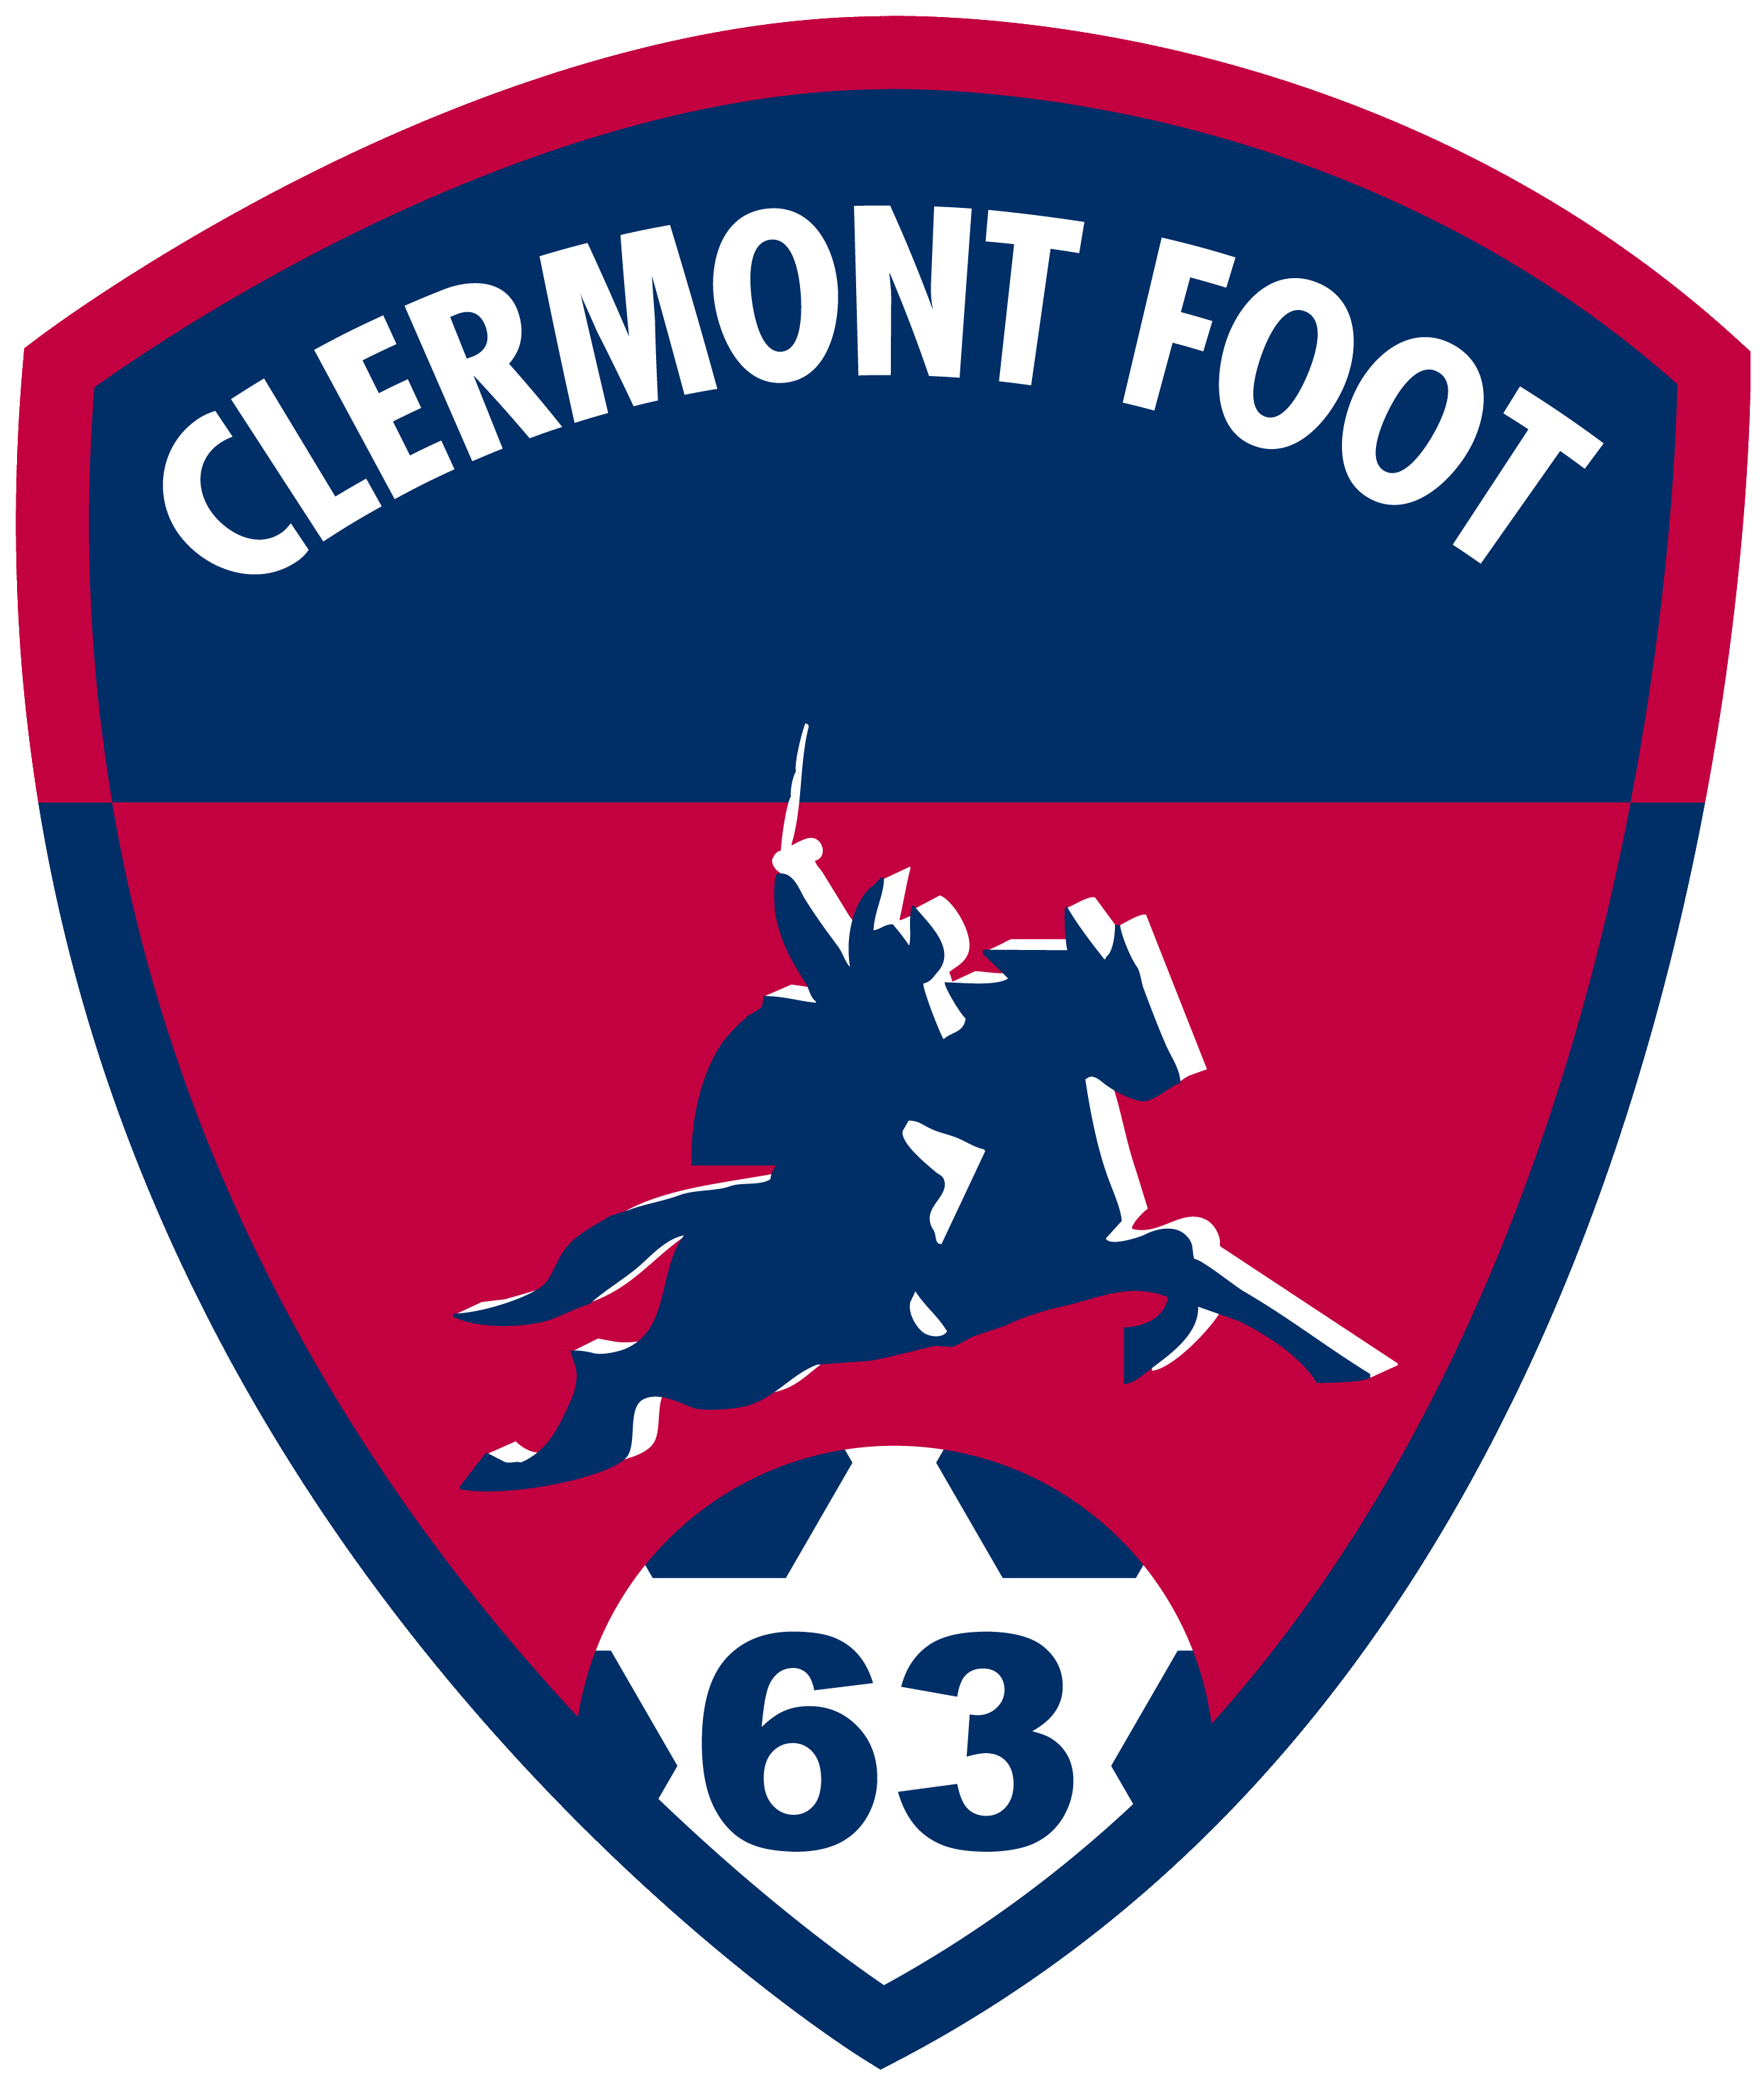 Clermont Foot vs Olympique Marseille Prediction: It’s a new dawn for Marseille 